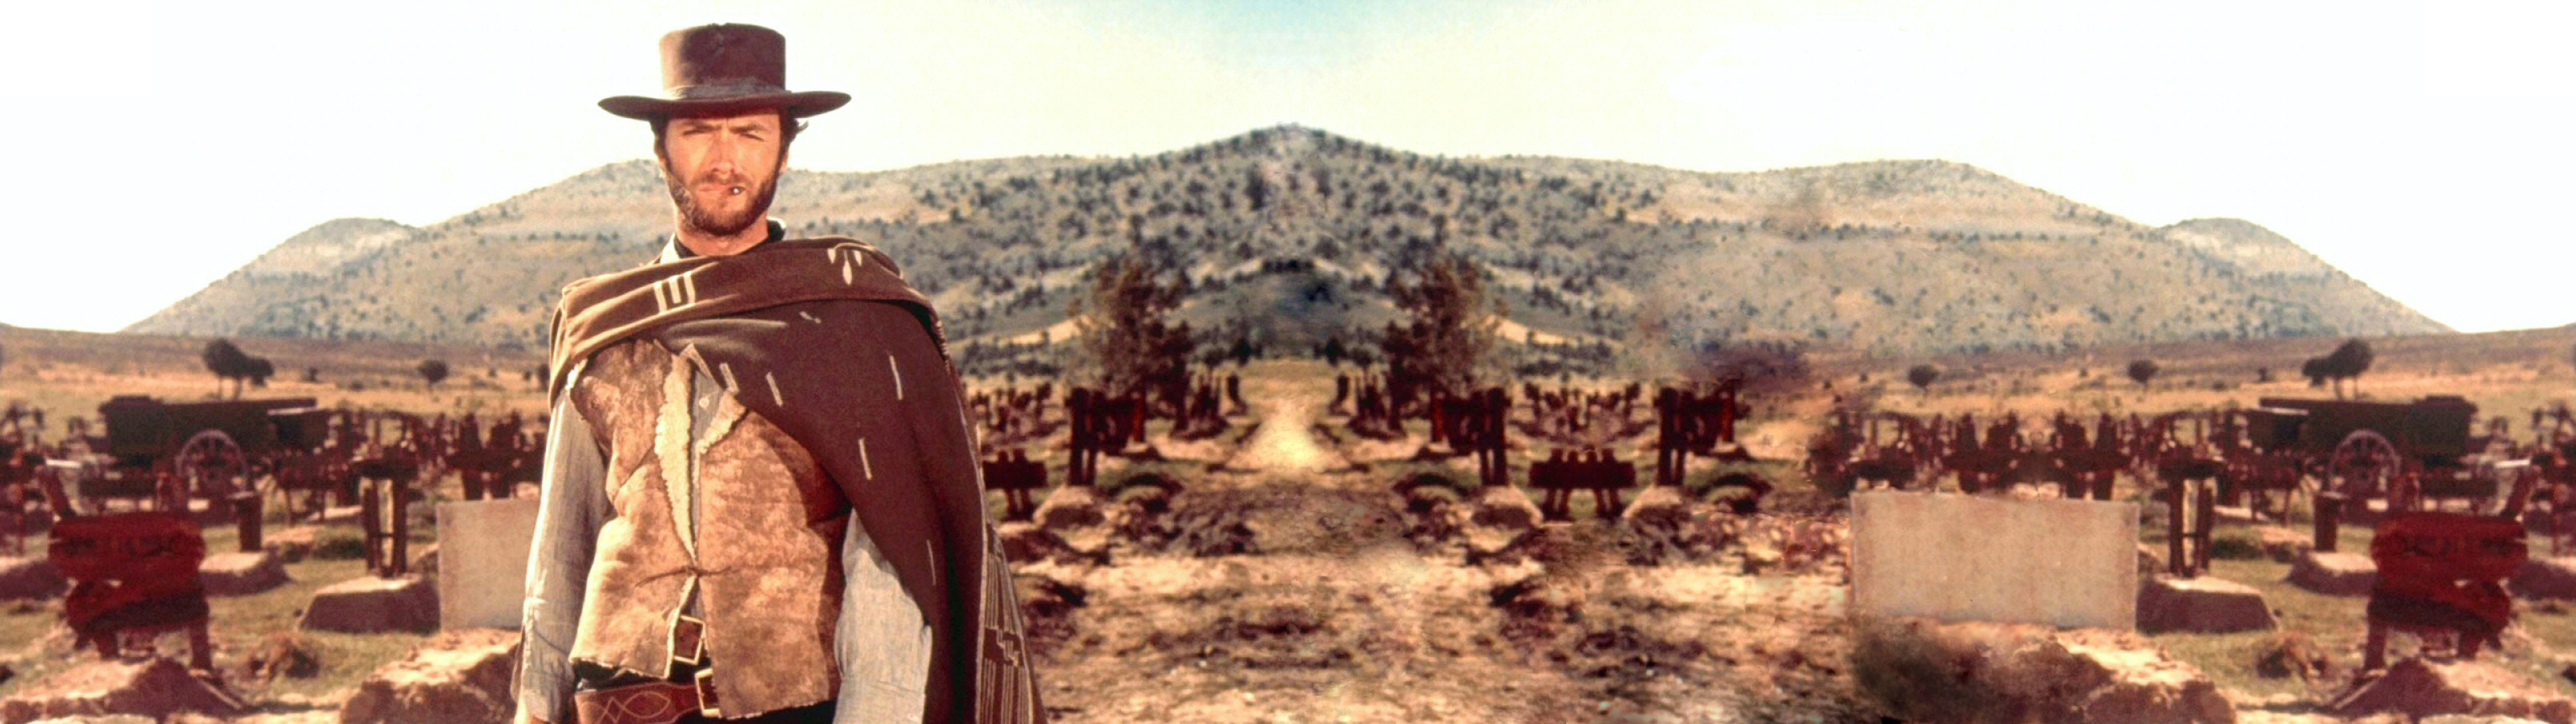 The Good, The Bad And The Ugly, Movie wallpapers, Western genre, Cinematic excellence, 3840x1080 Dual Screen Desktop